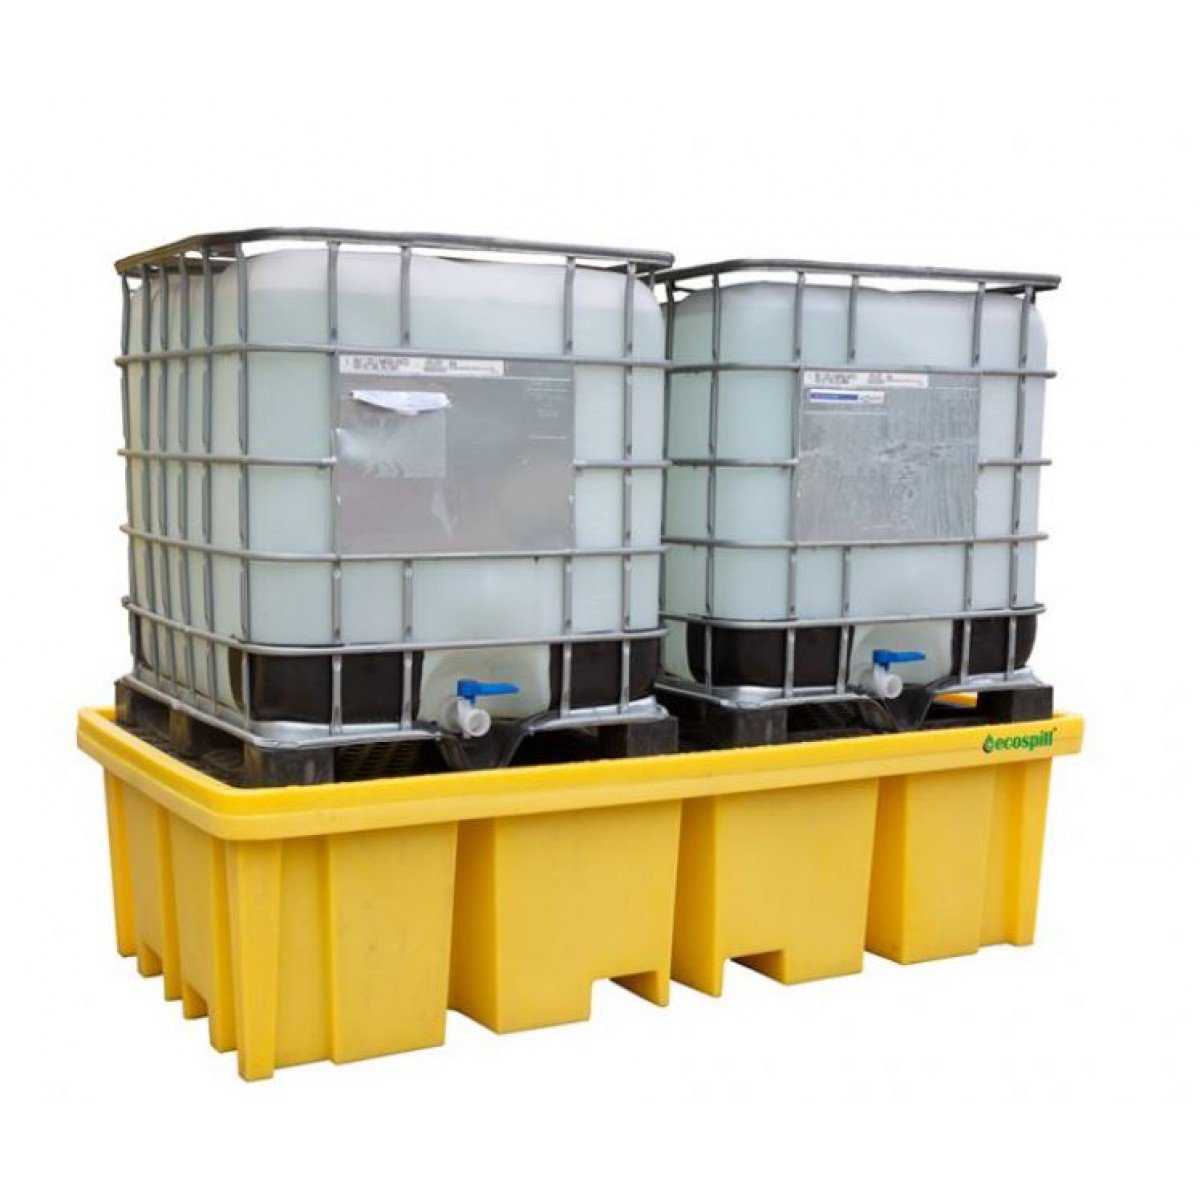 4 way entry double IBC spill pallet